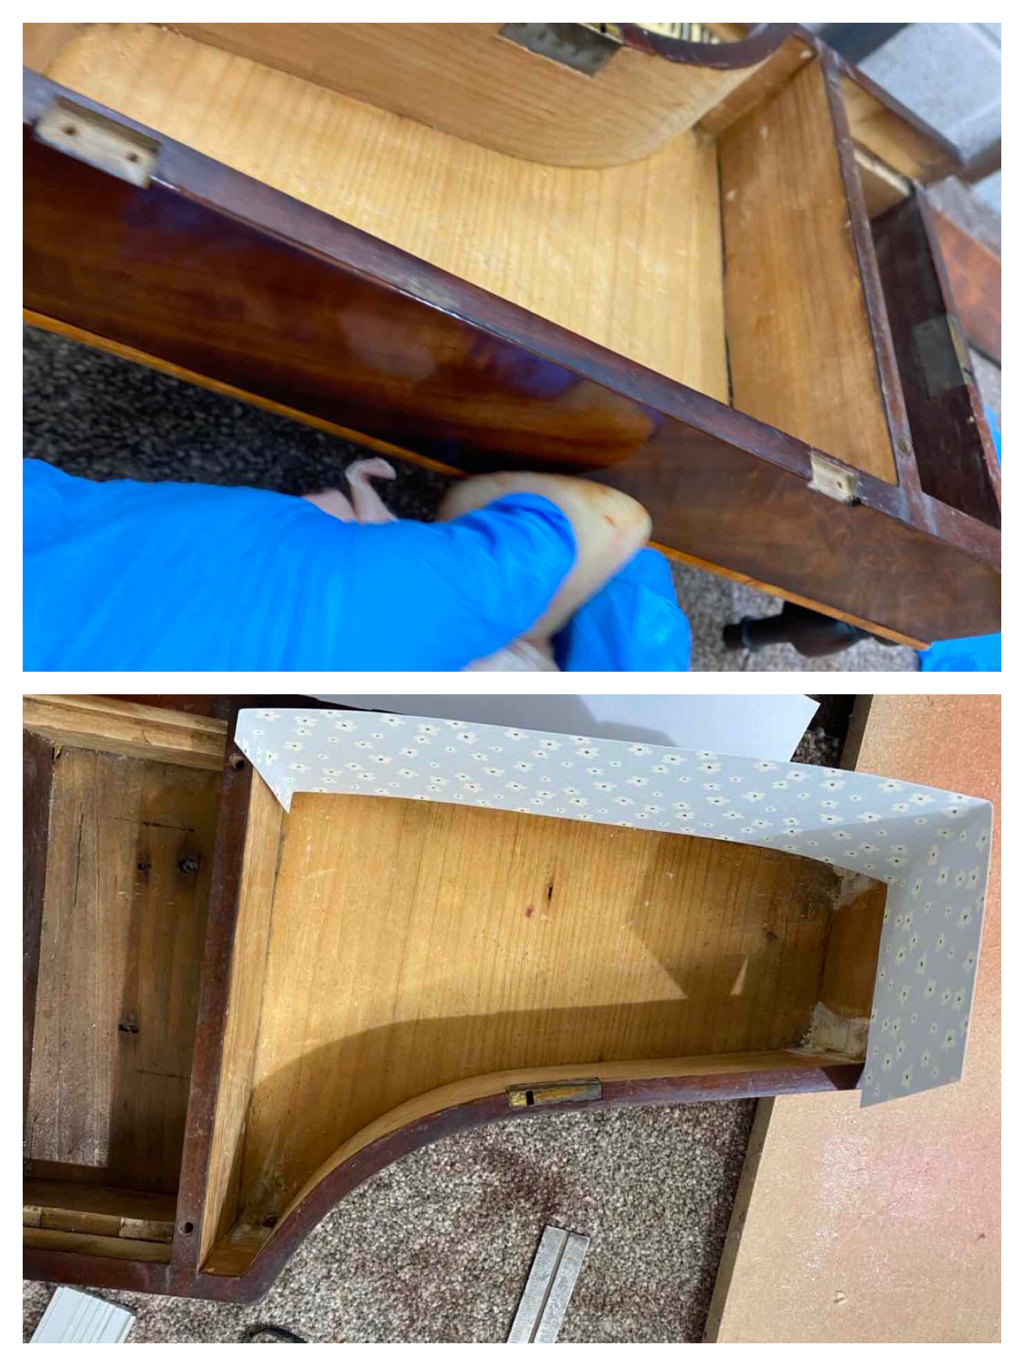 French polishing and lining antique piano workbox